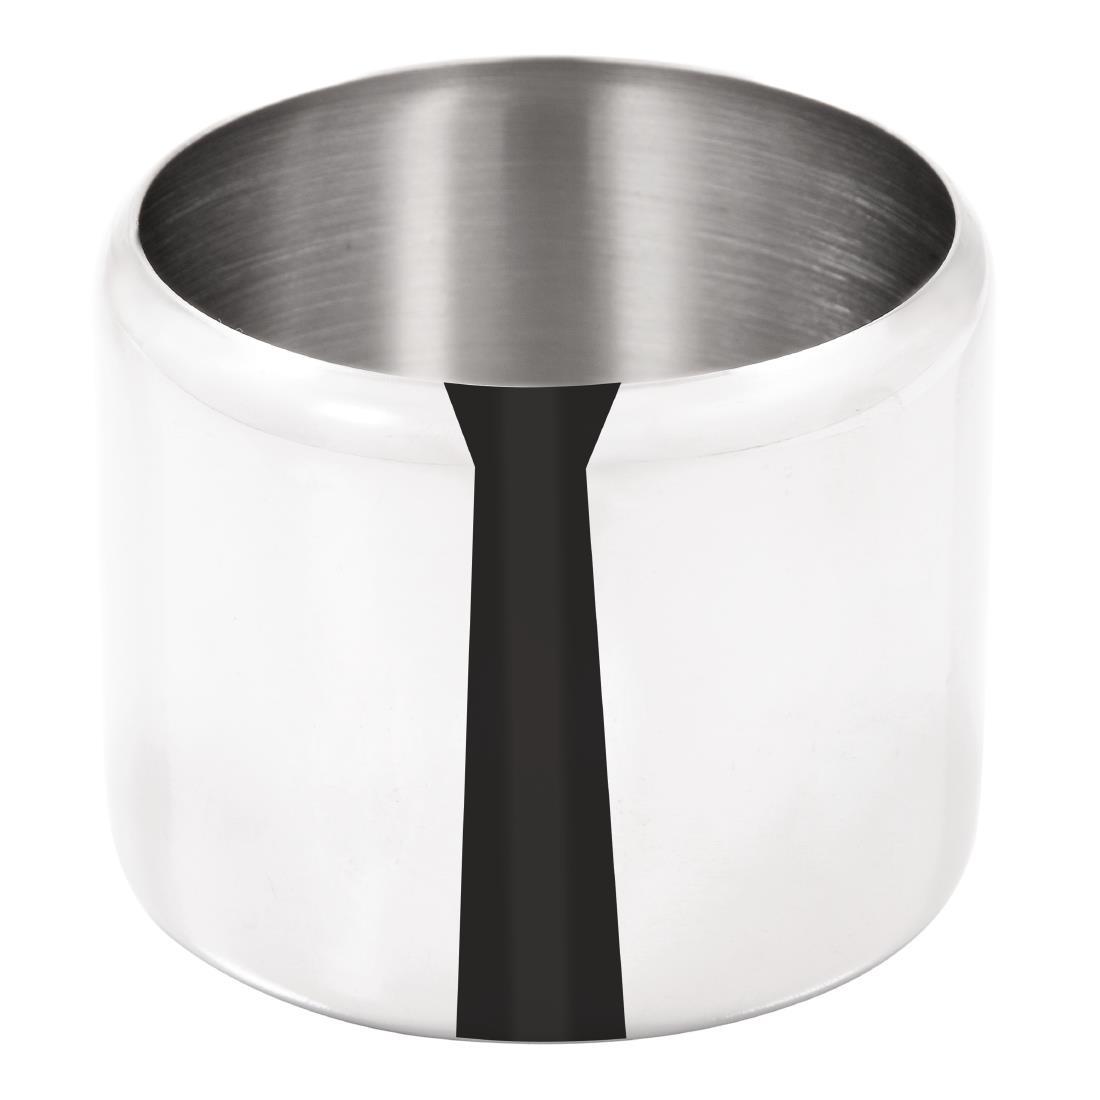 Olympia Concorde Stainless Steel Sugar Bowl 84mm - J729  - 2